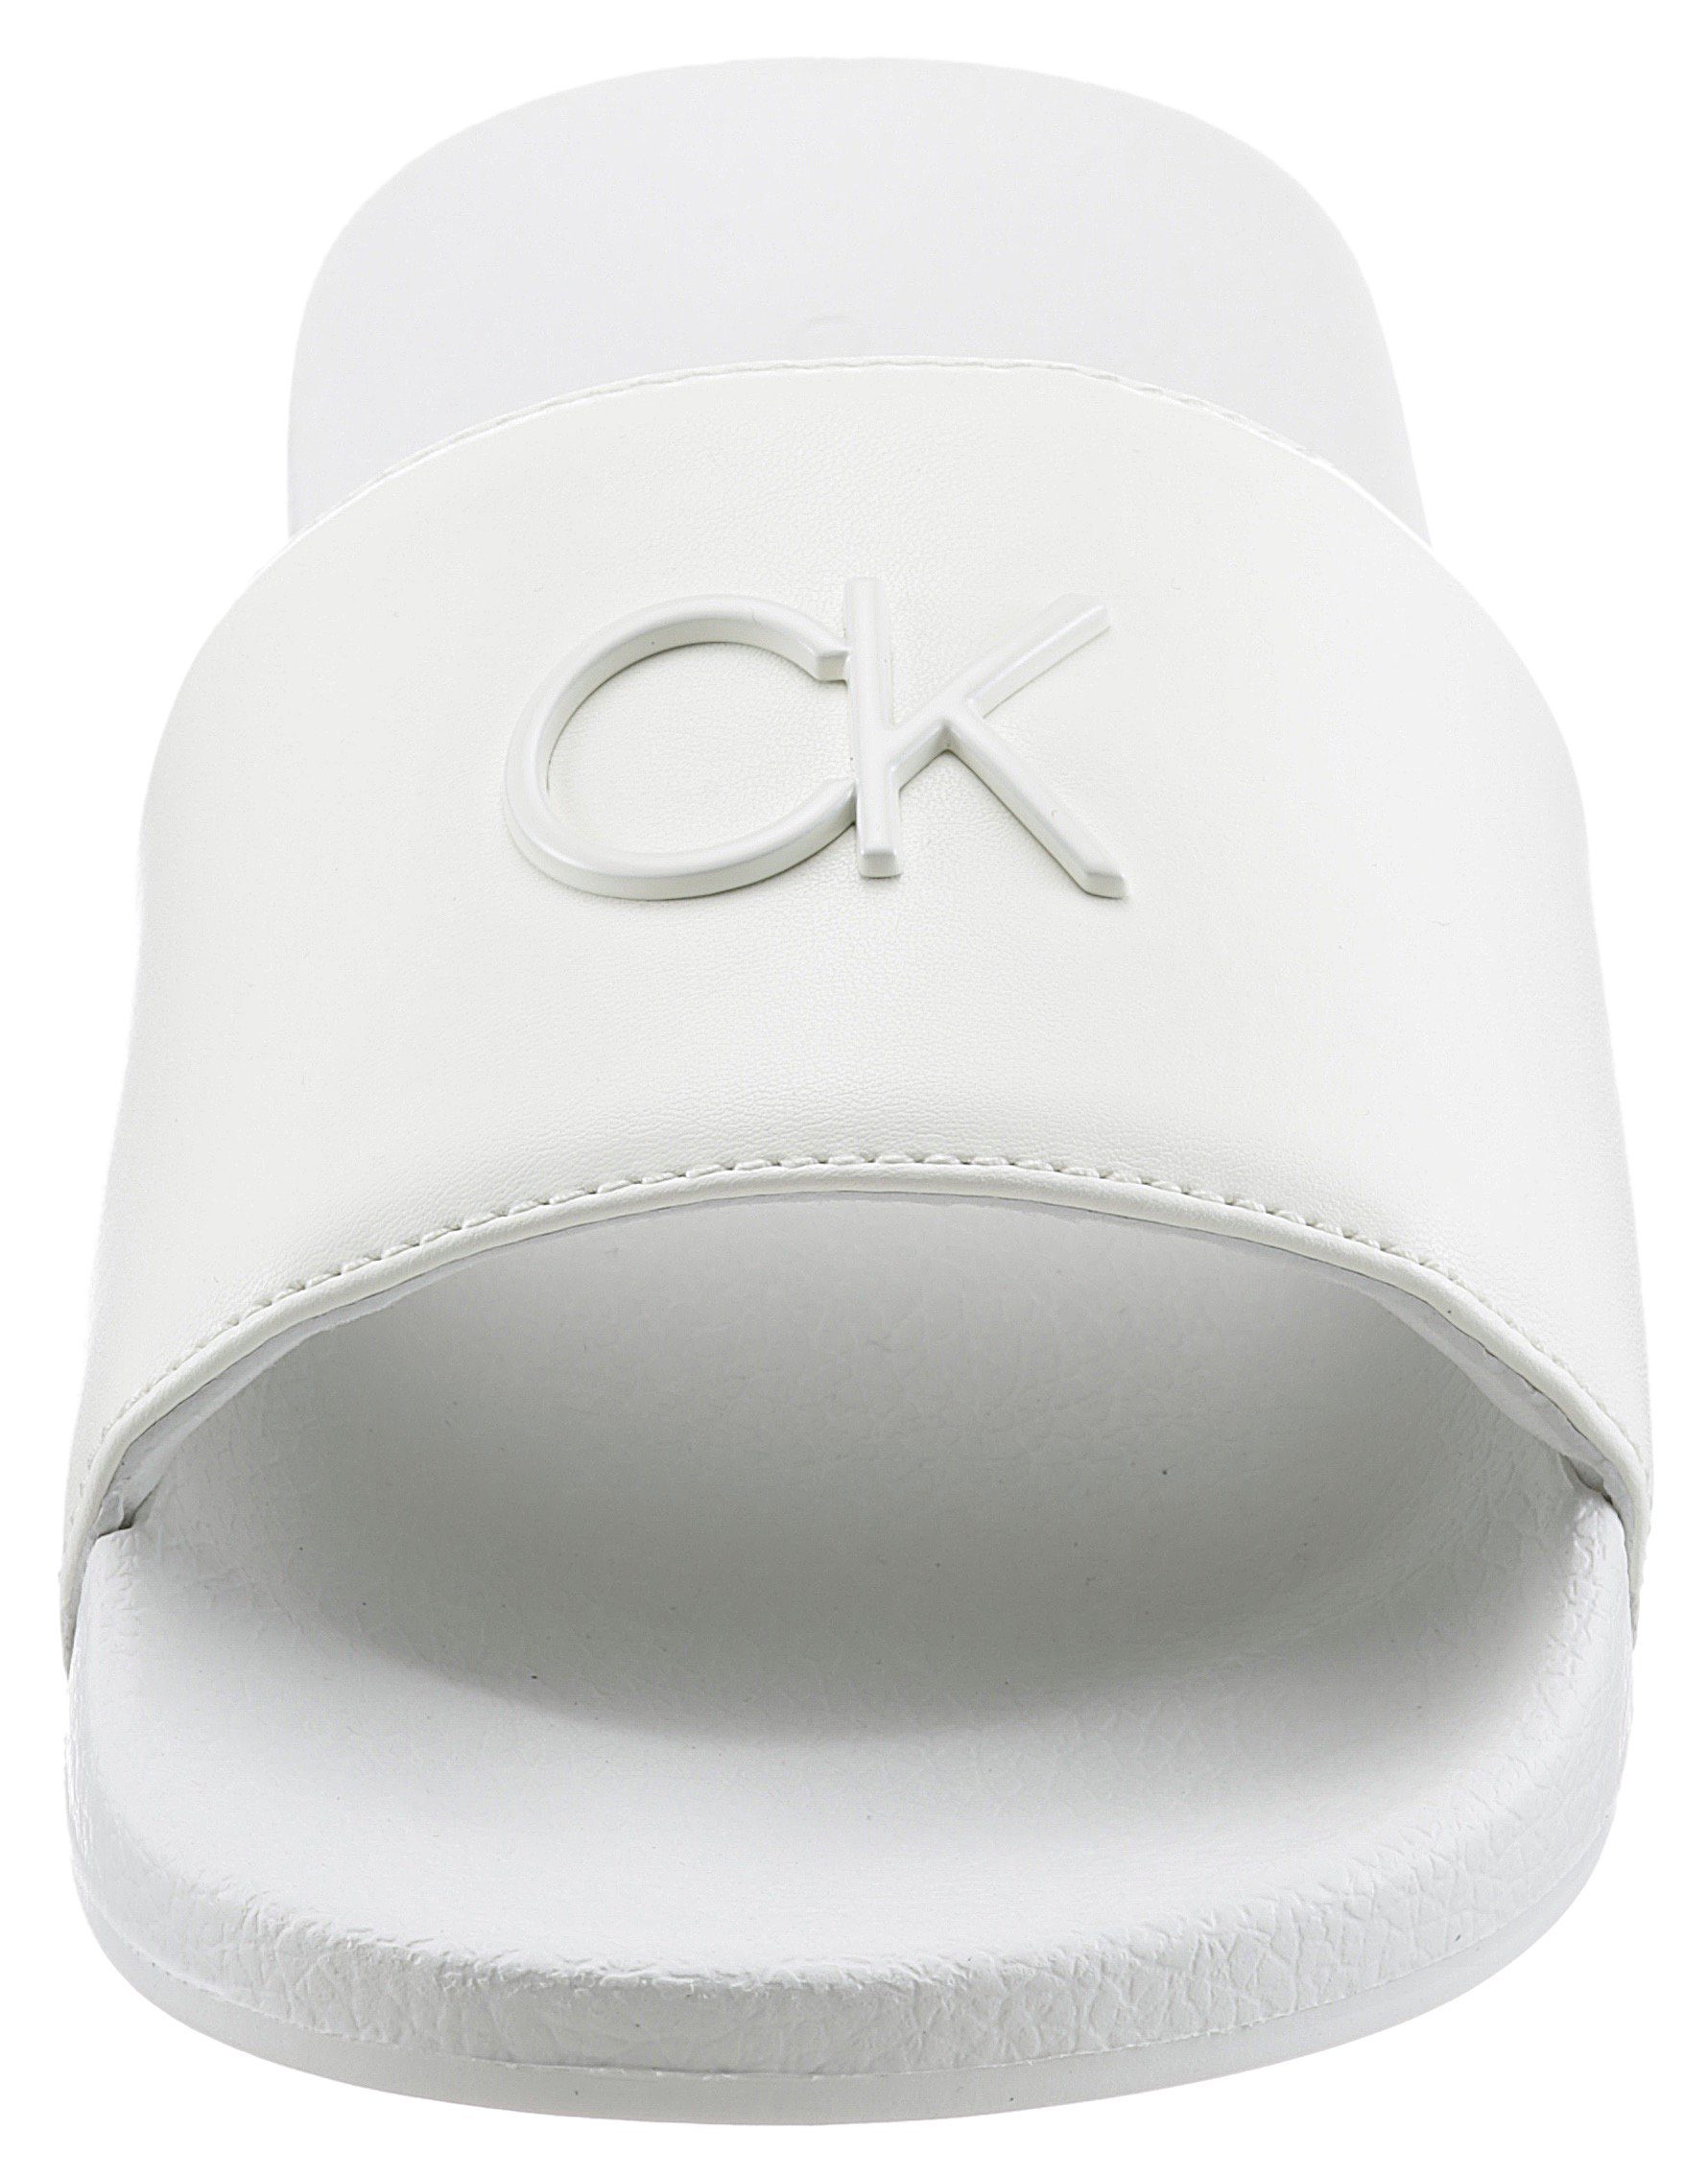 Calvin Klein FORTINA 17L *I in Badepantolette Form offwhite bequemer